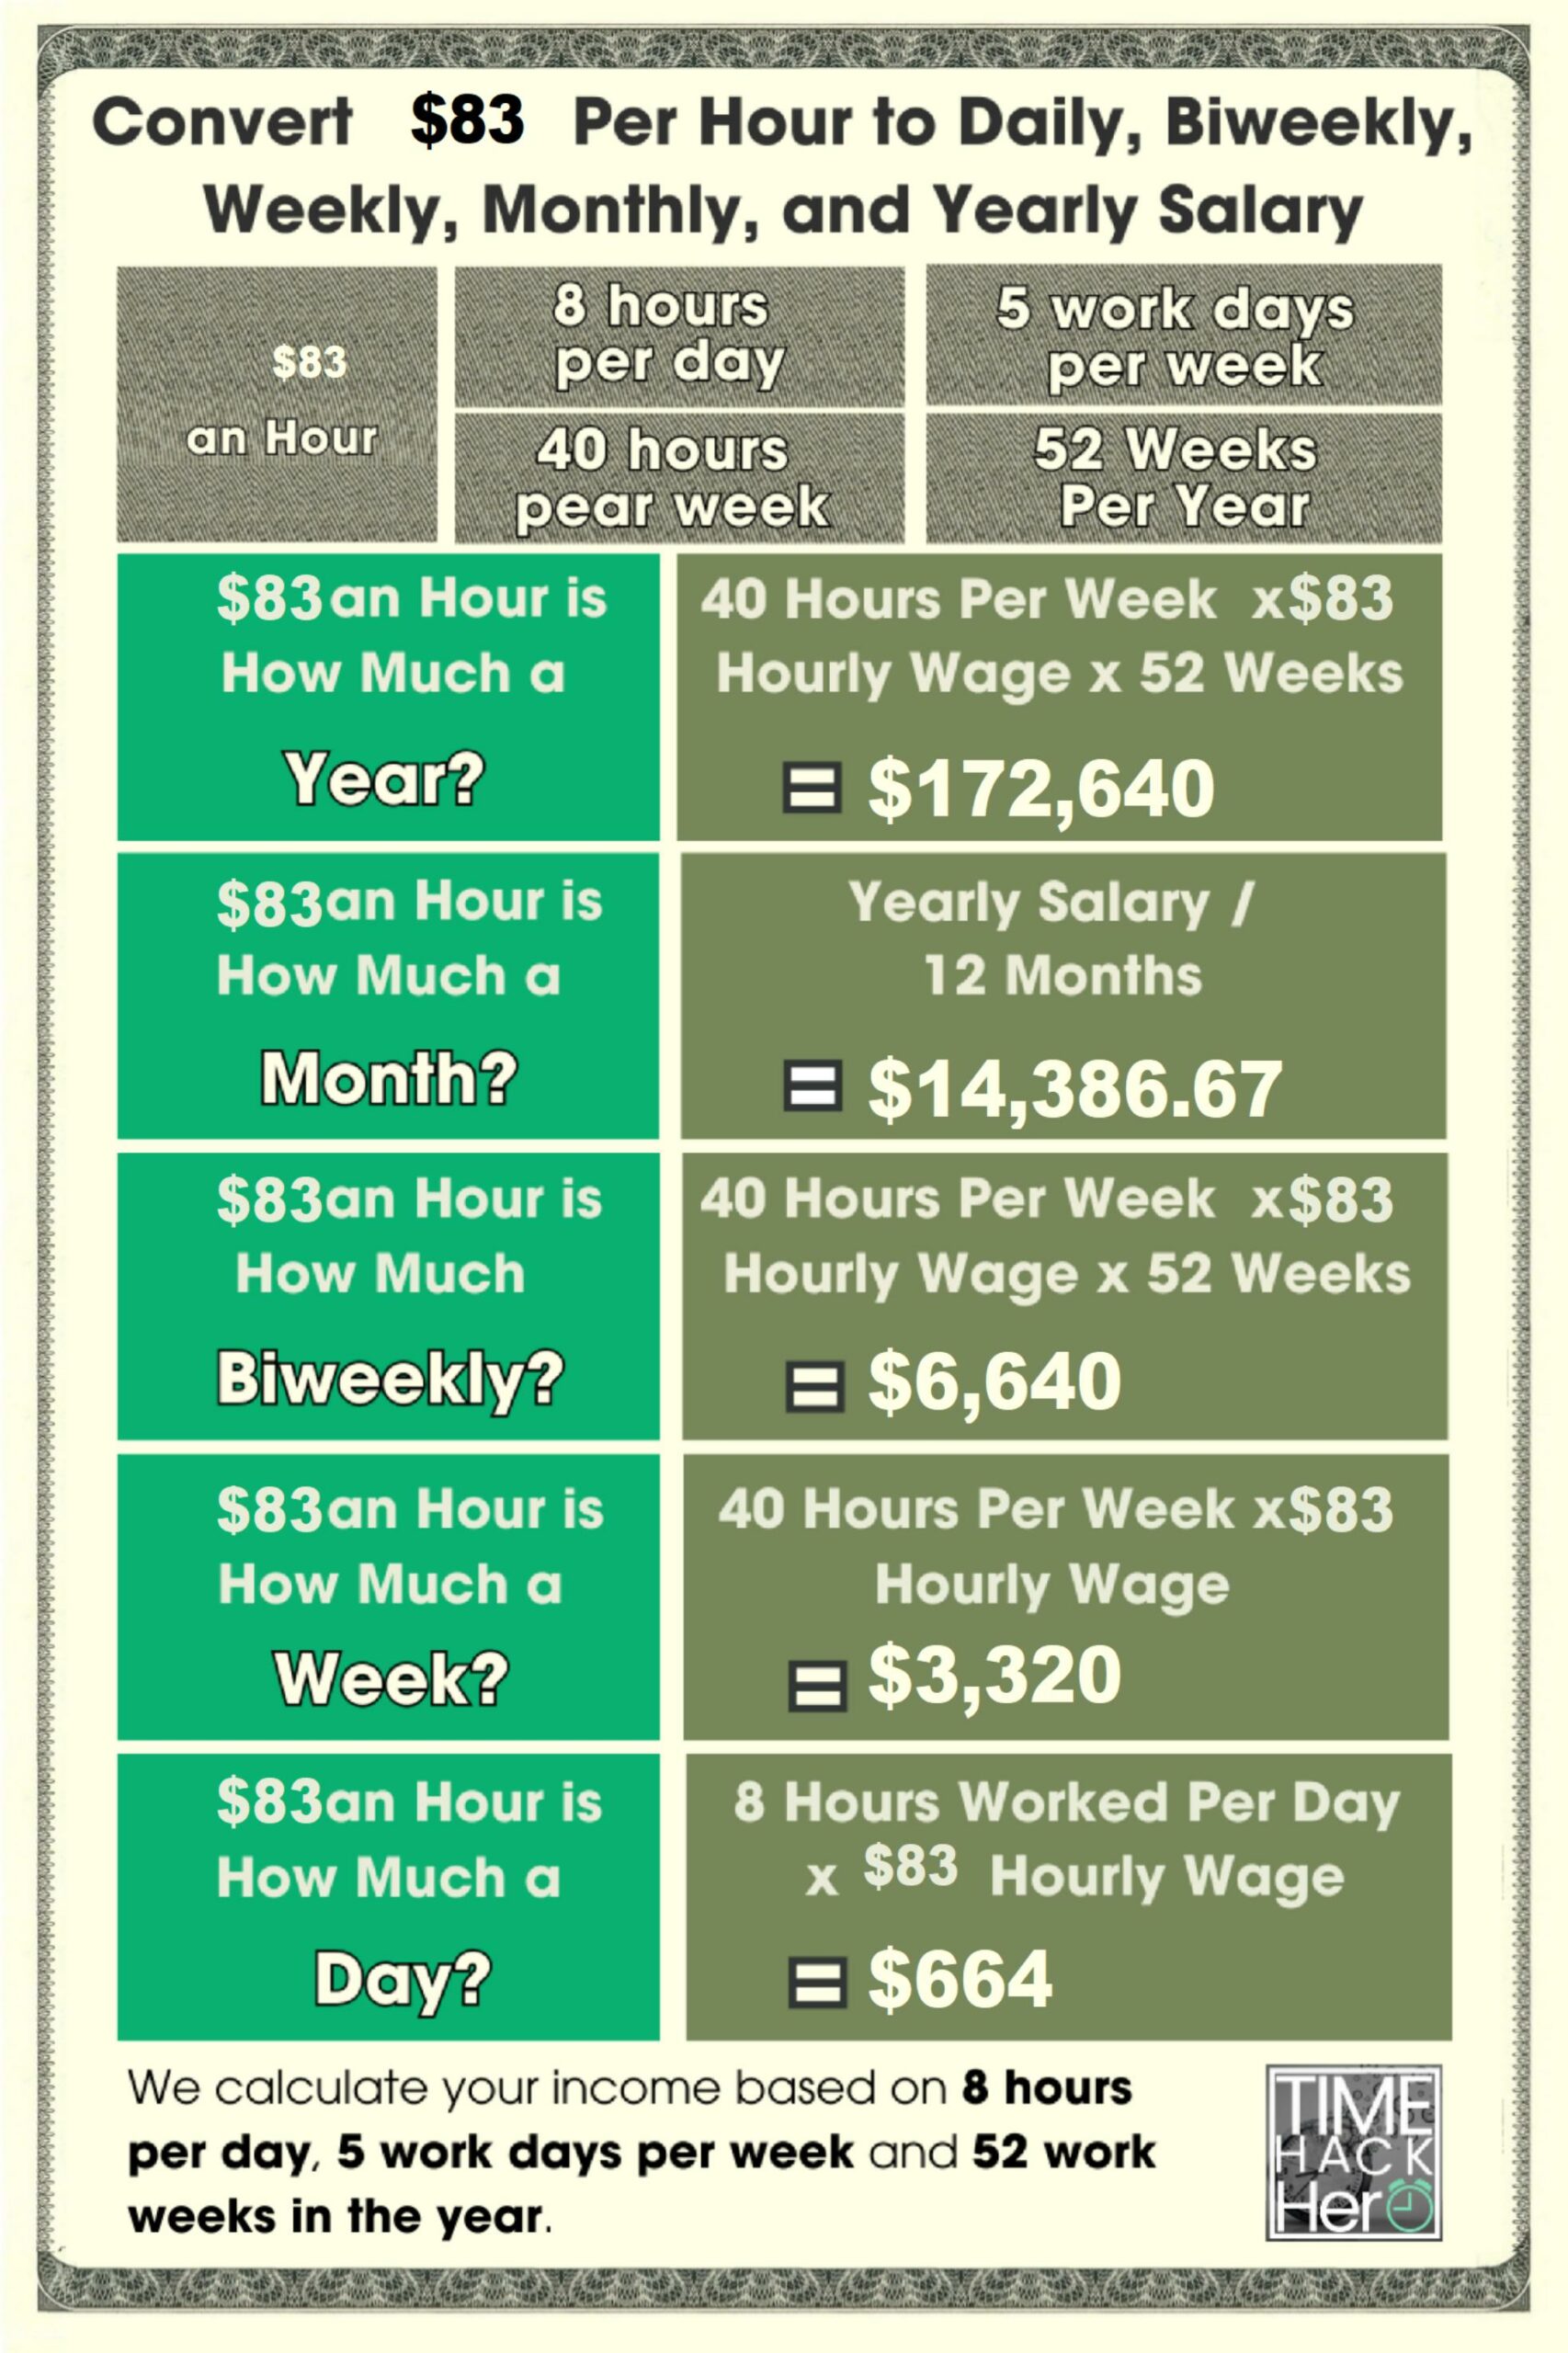 Convert $83 Per Hour to Weekly, Monthly, and Yearly Salary